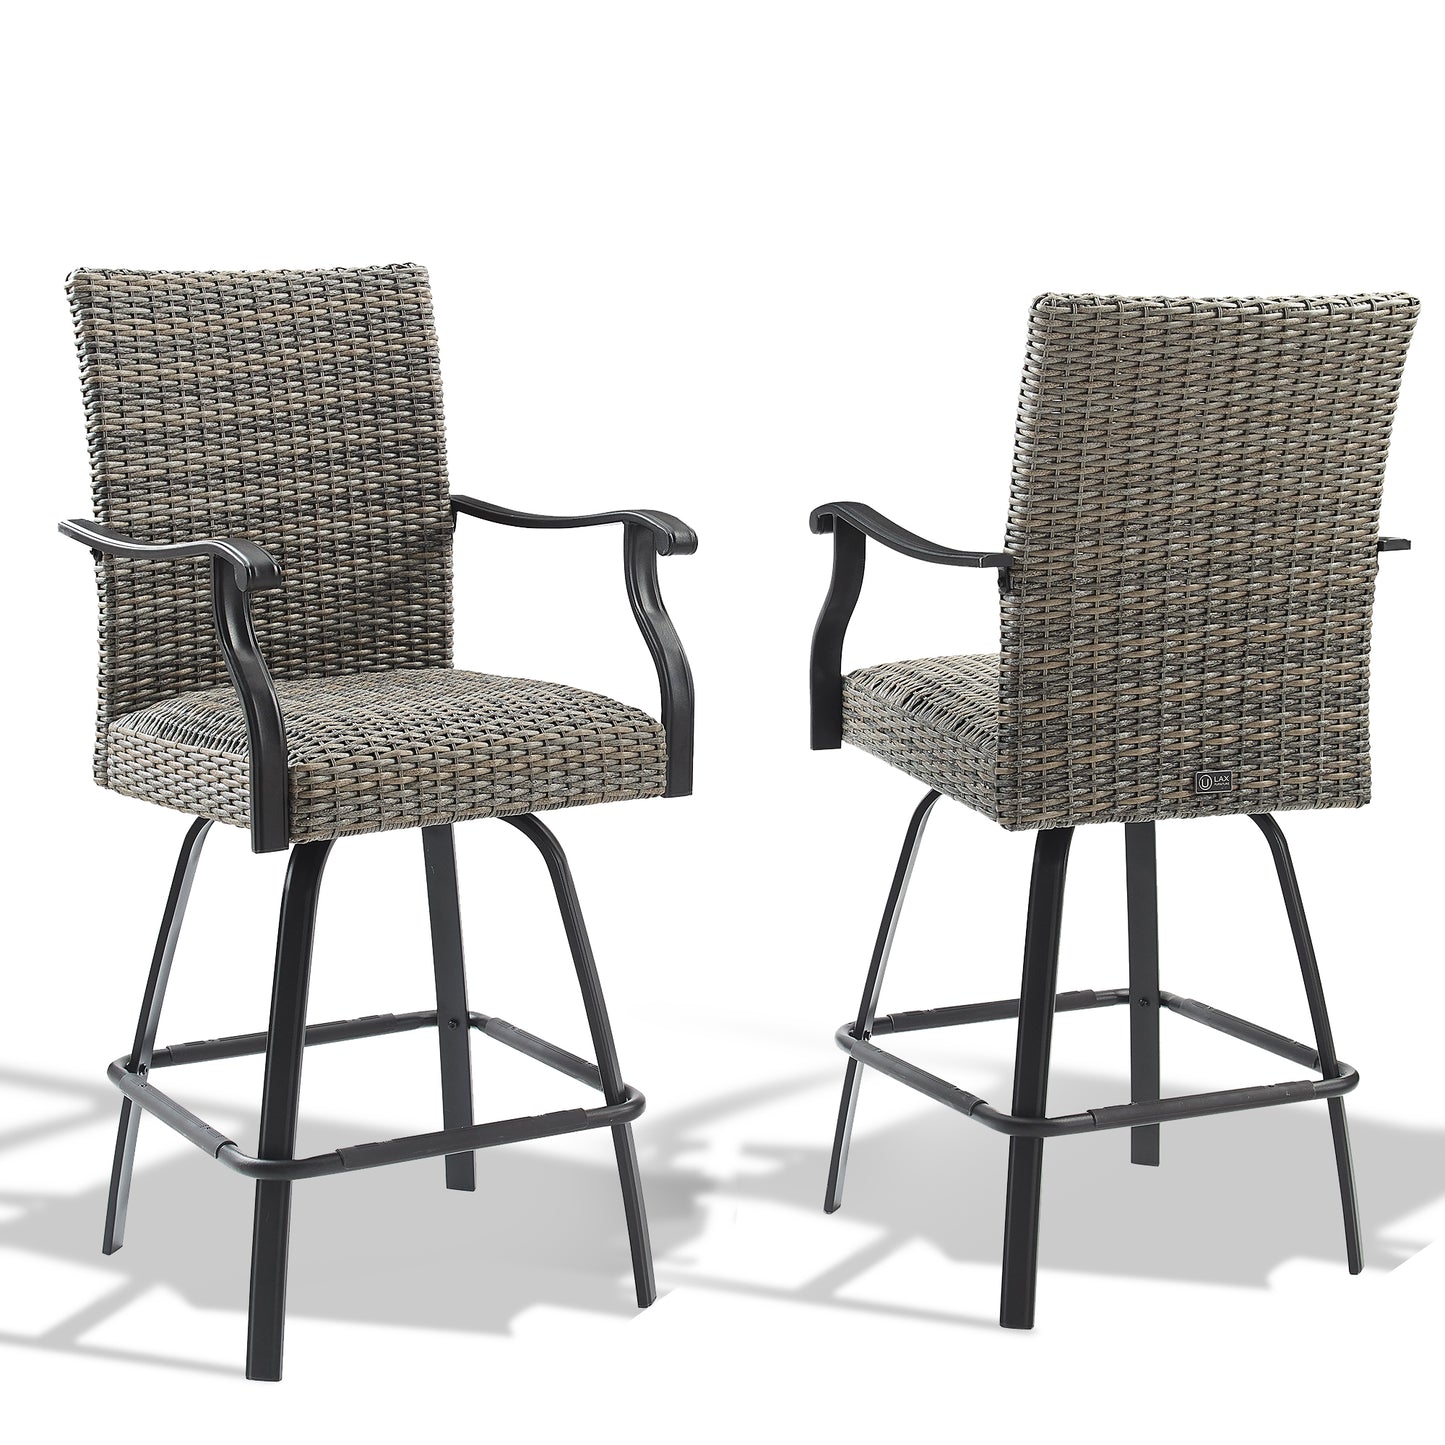 Set of 2 Outdoor Bar Stools Wicker Patio Counter Height Bar Stool Chairs Padded with Quick Dry Foam